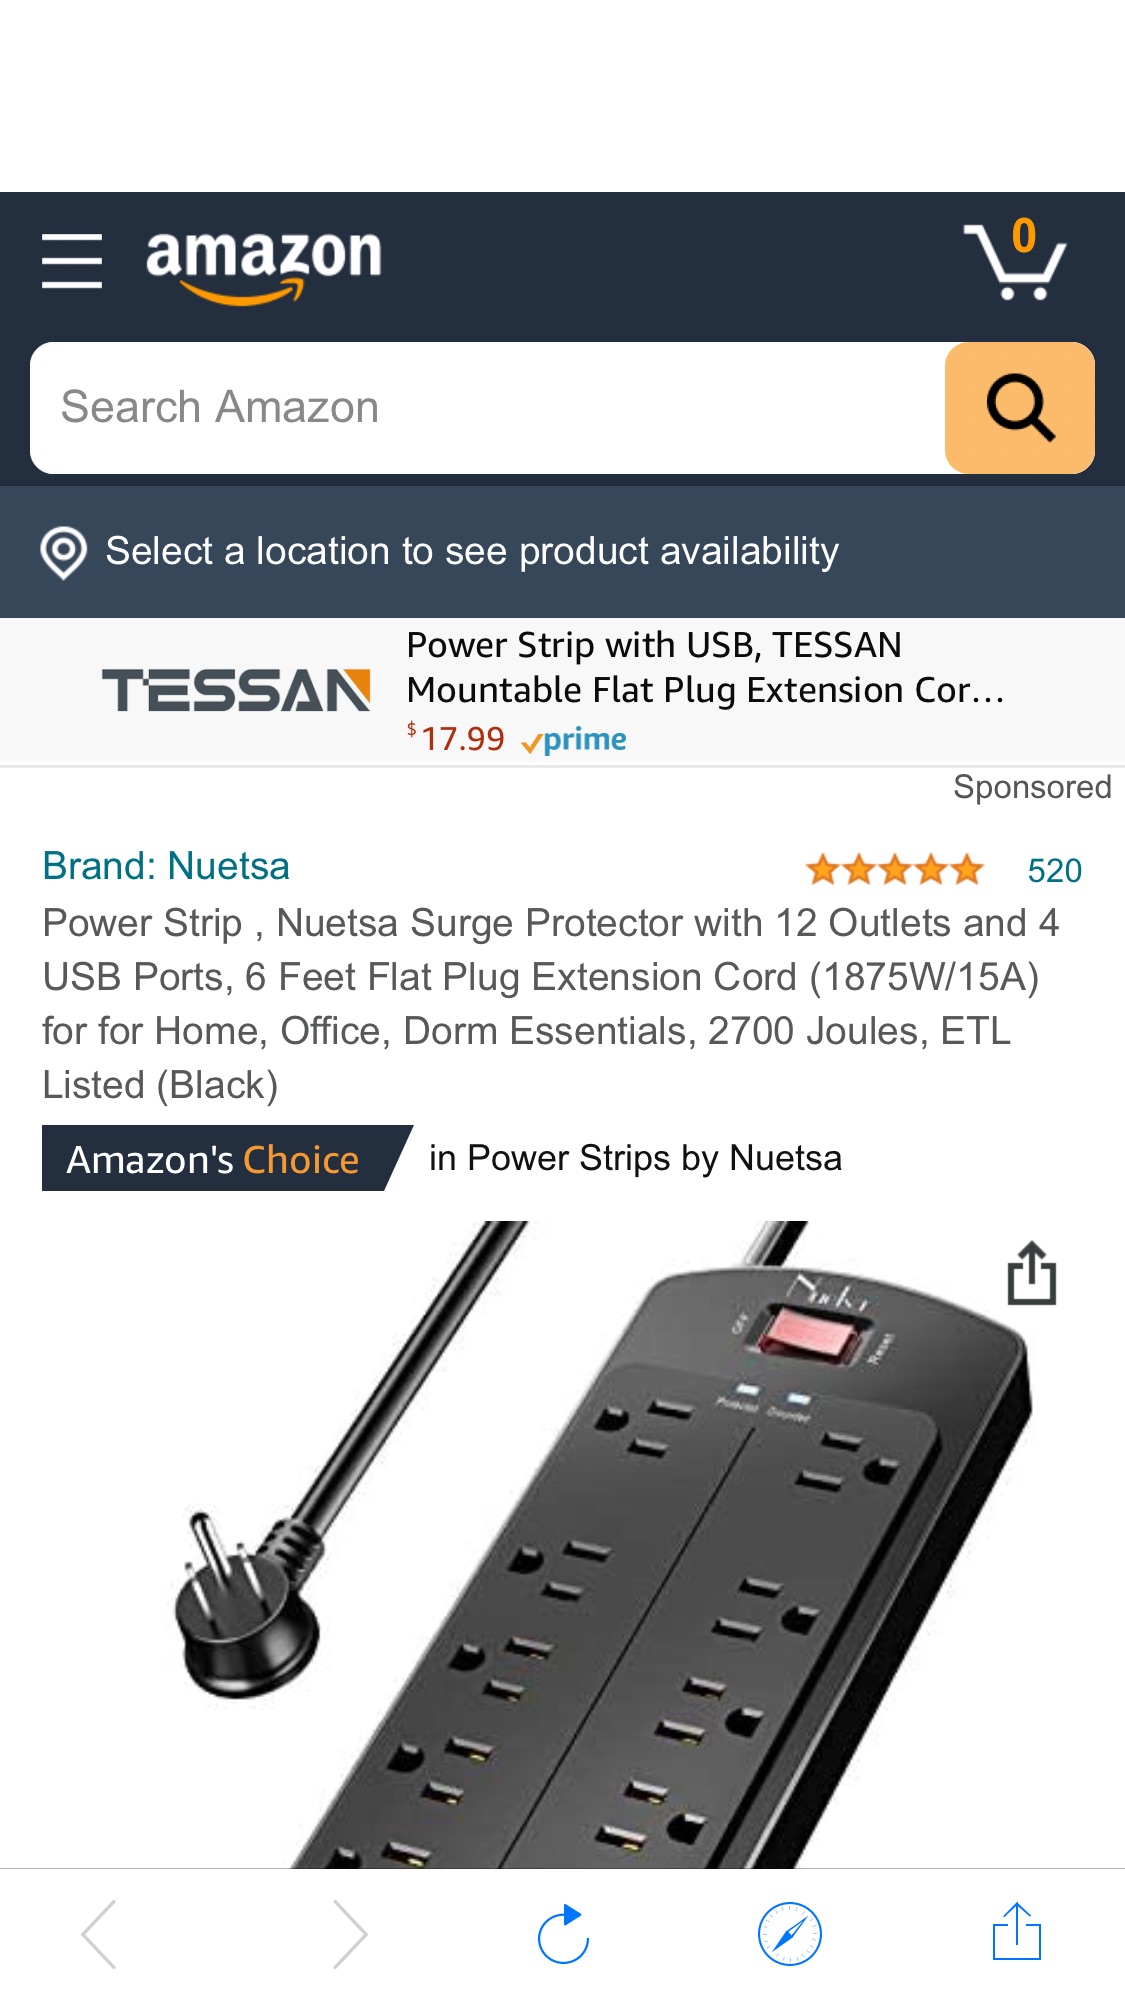 Nuetsa Surge Protector with 12 Outlets and 4 USB Ports, 6 Feet Flat Plug Extension Cord (1875W/15A) for for Home, Office, Dorm Essentials, 2700 Joules, ETL Listed (Black): Electronics12口排插